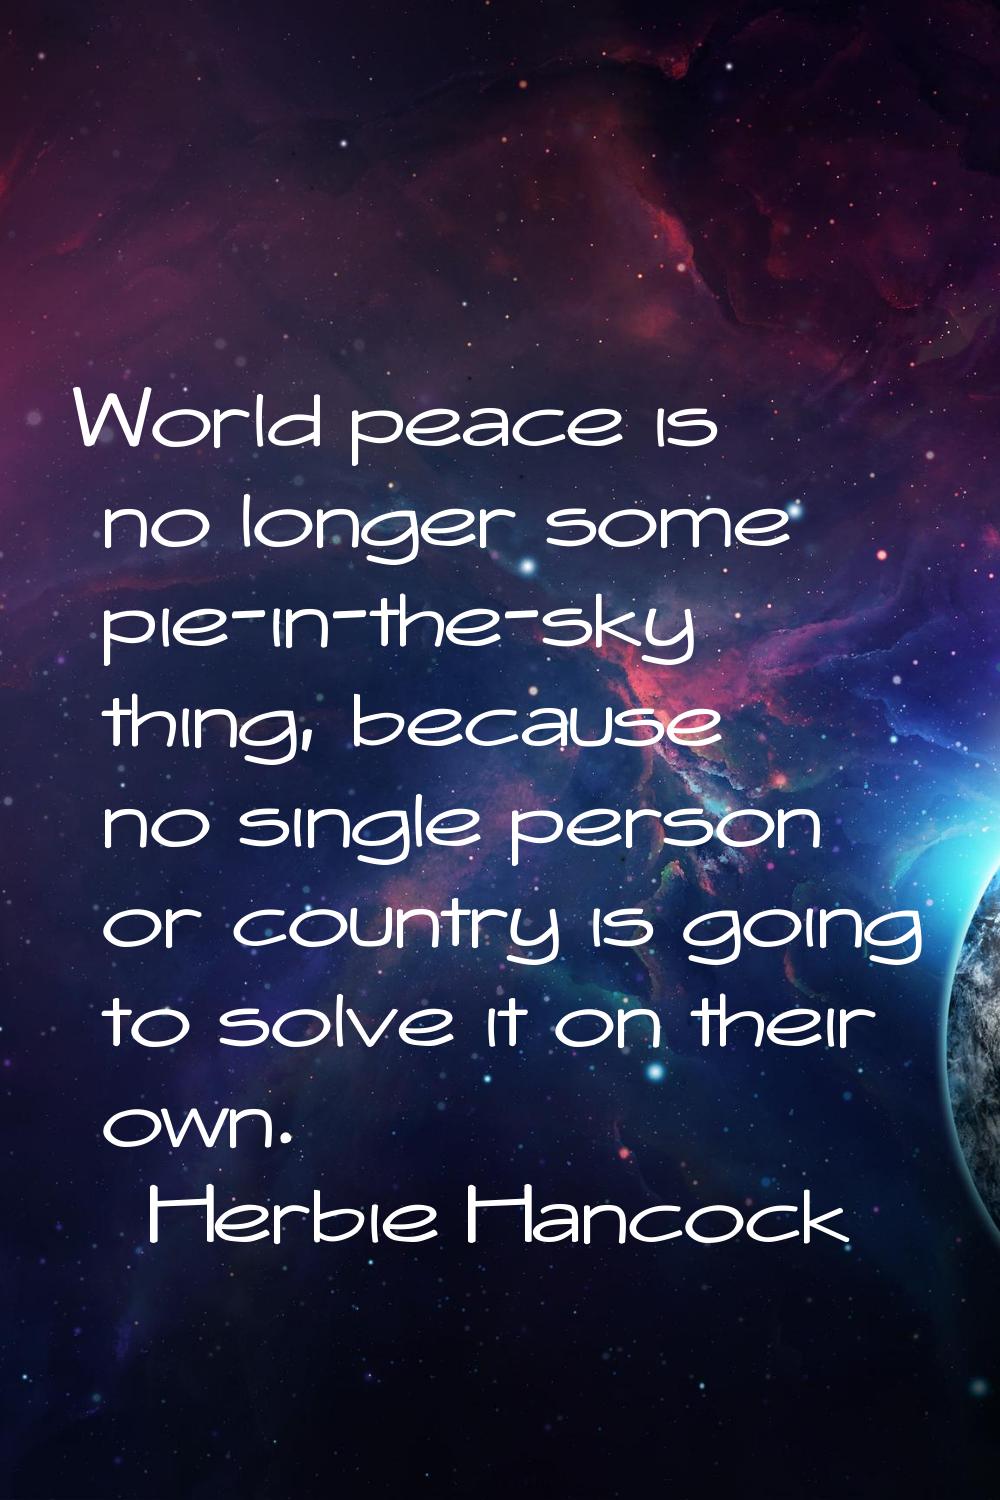 World peace is no longer some pie-in-the-sky thing, because no single person or country is going to